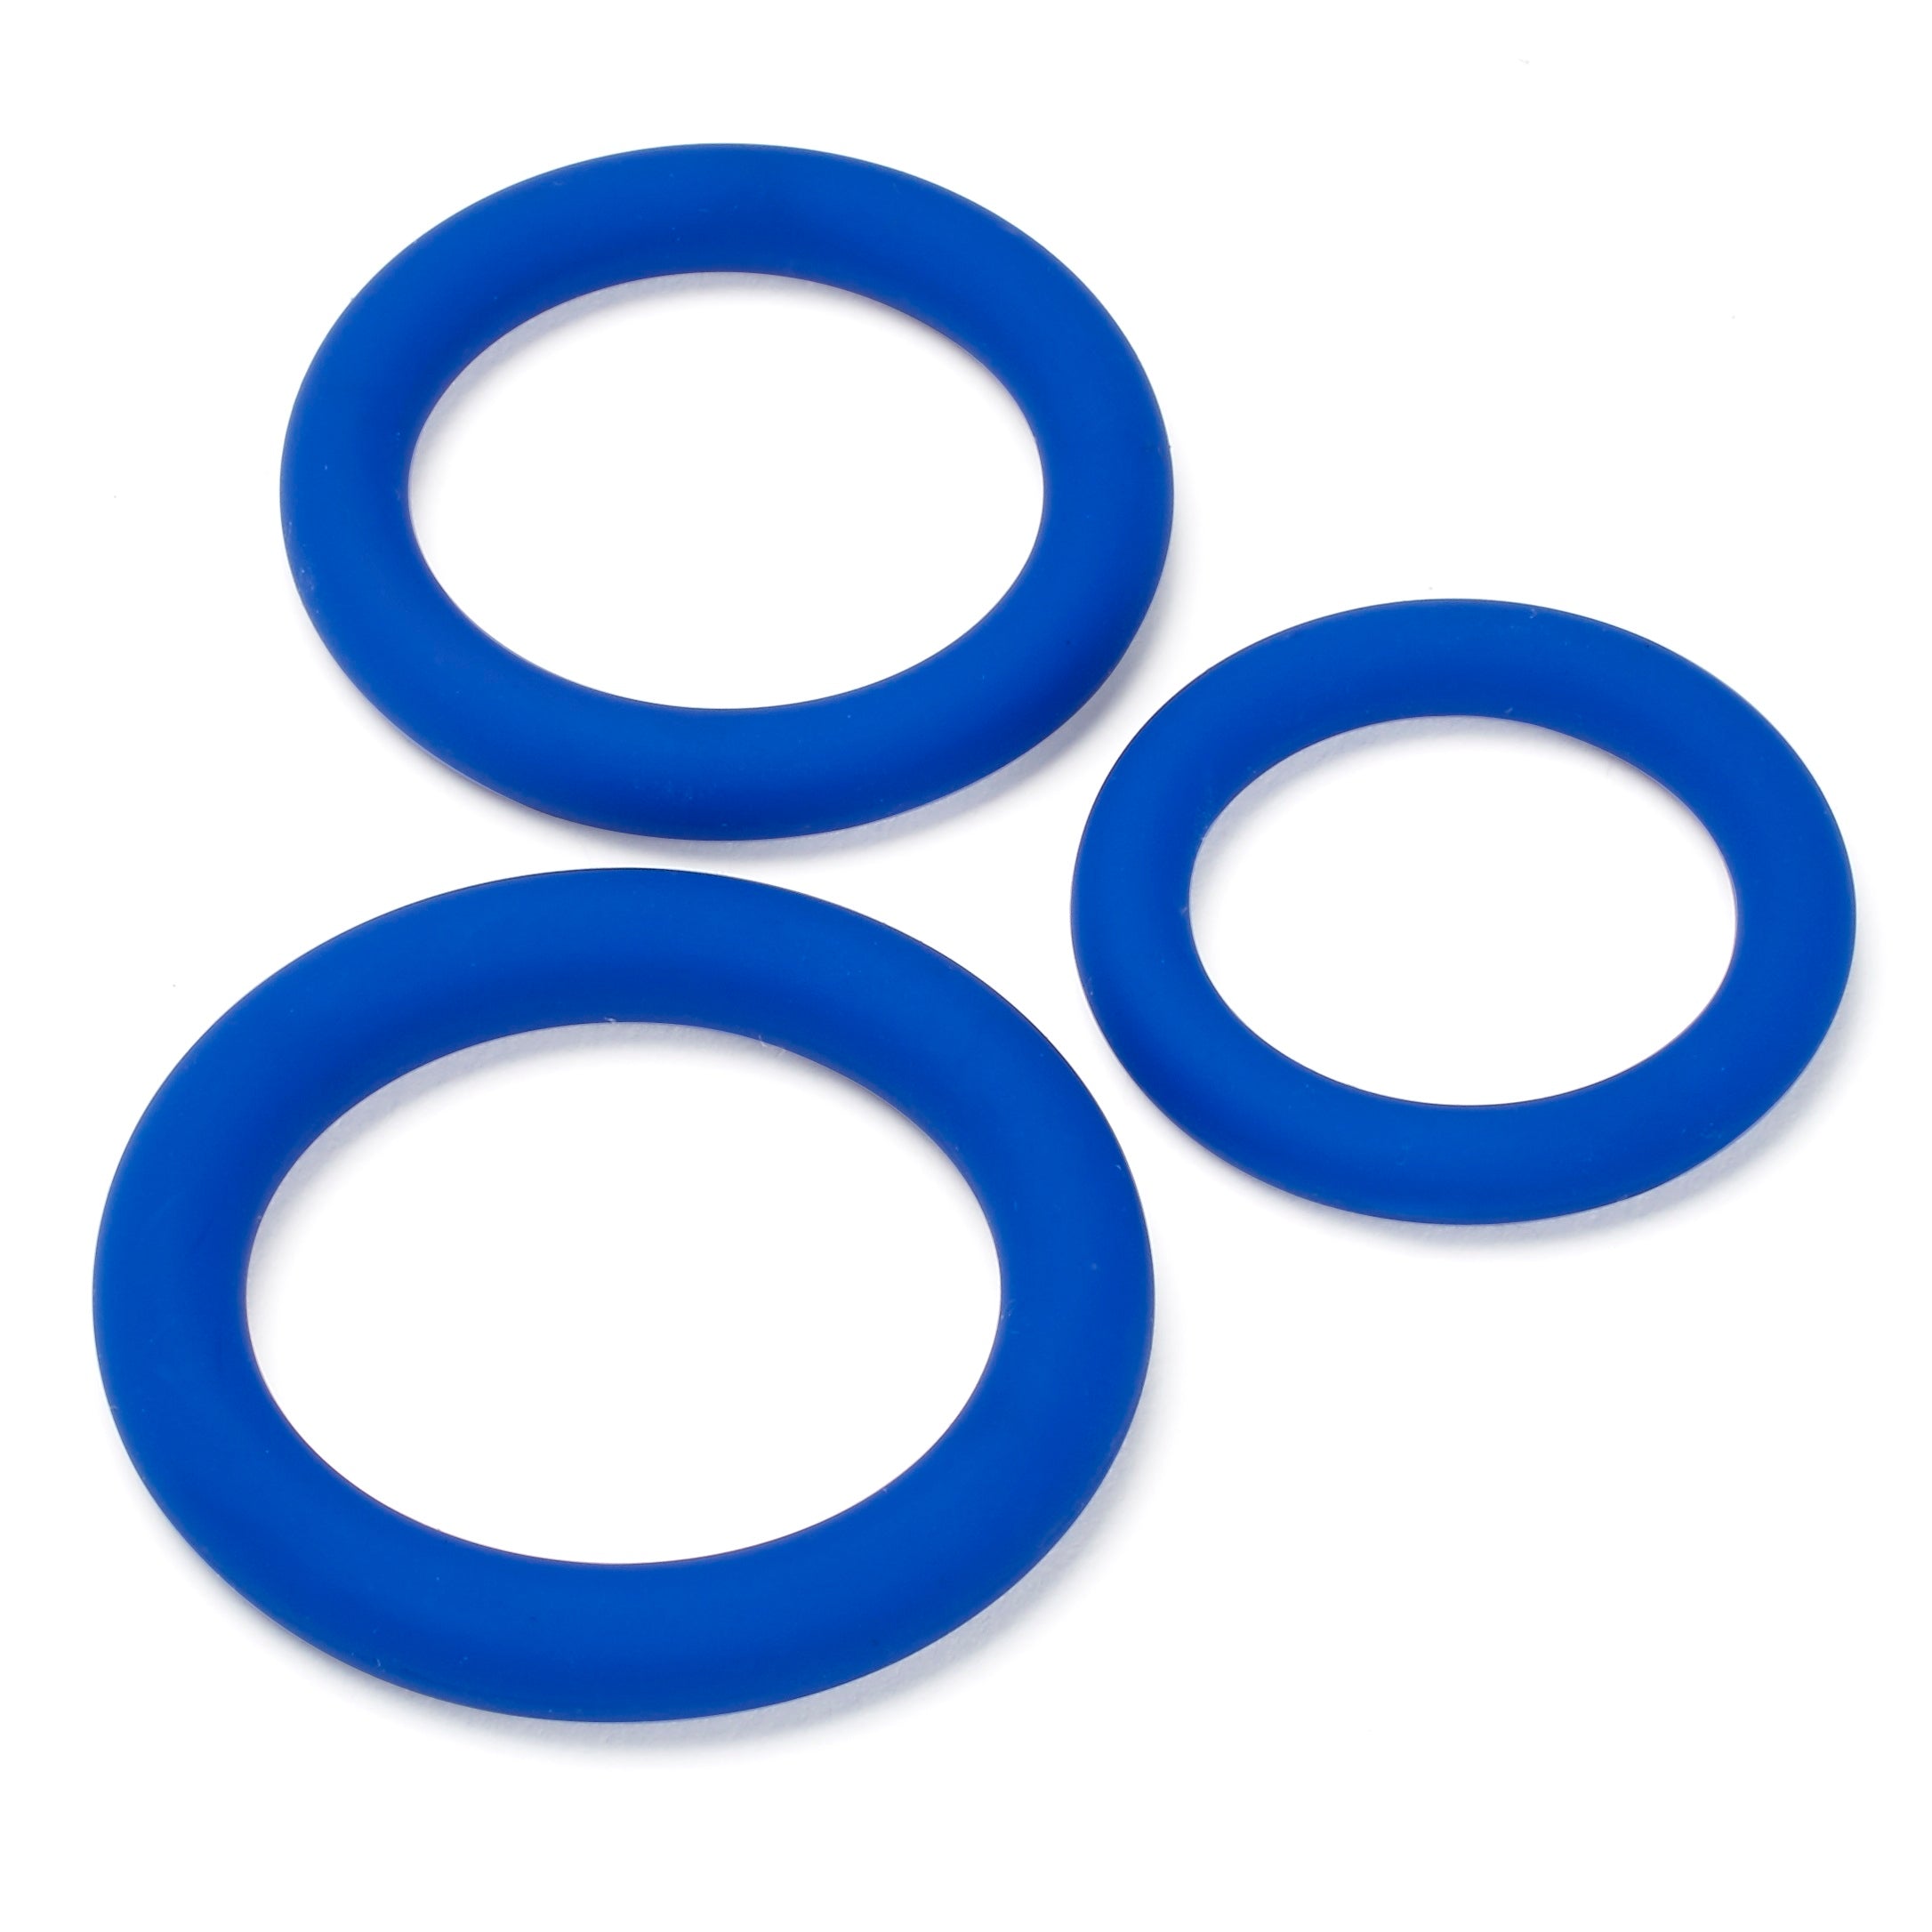 Cloud 9 Pro Sensual Silicone Cock Ring Set Blue - Enhance Stamina and Pleasure with Premium Rings